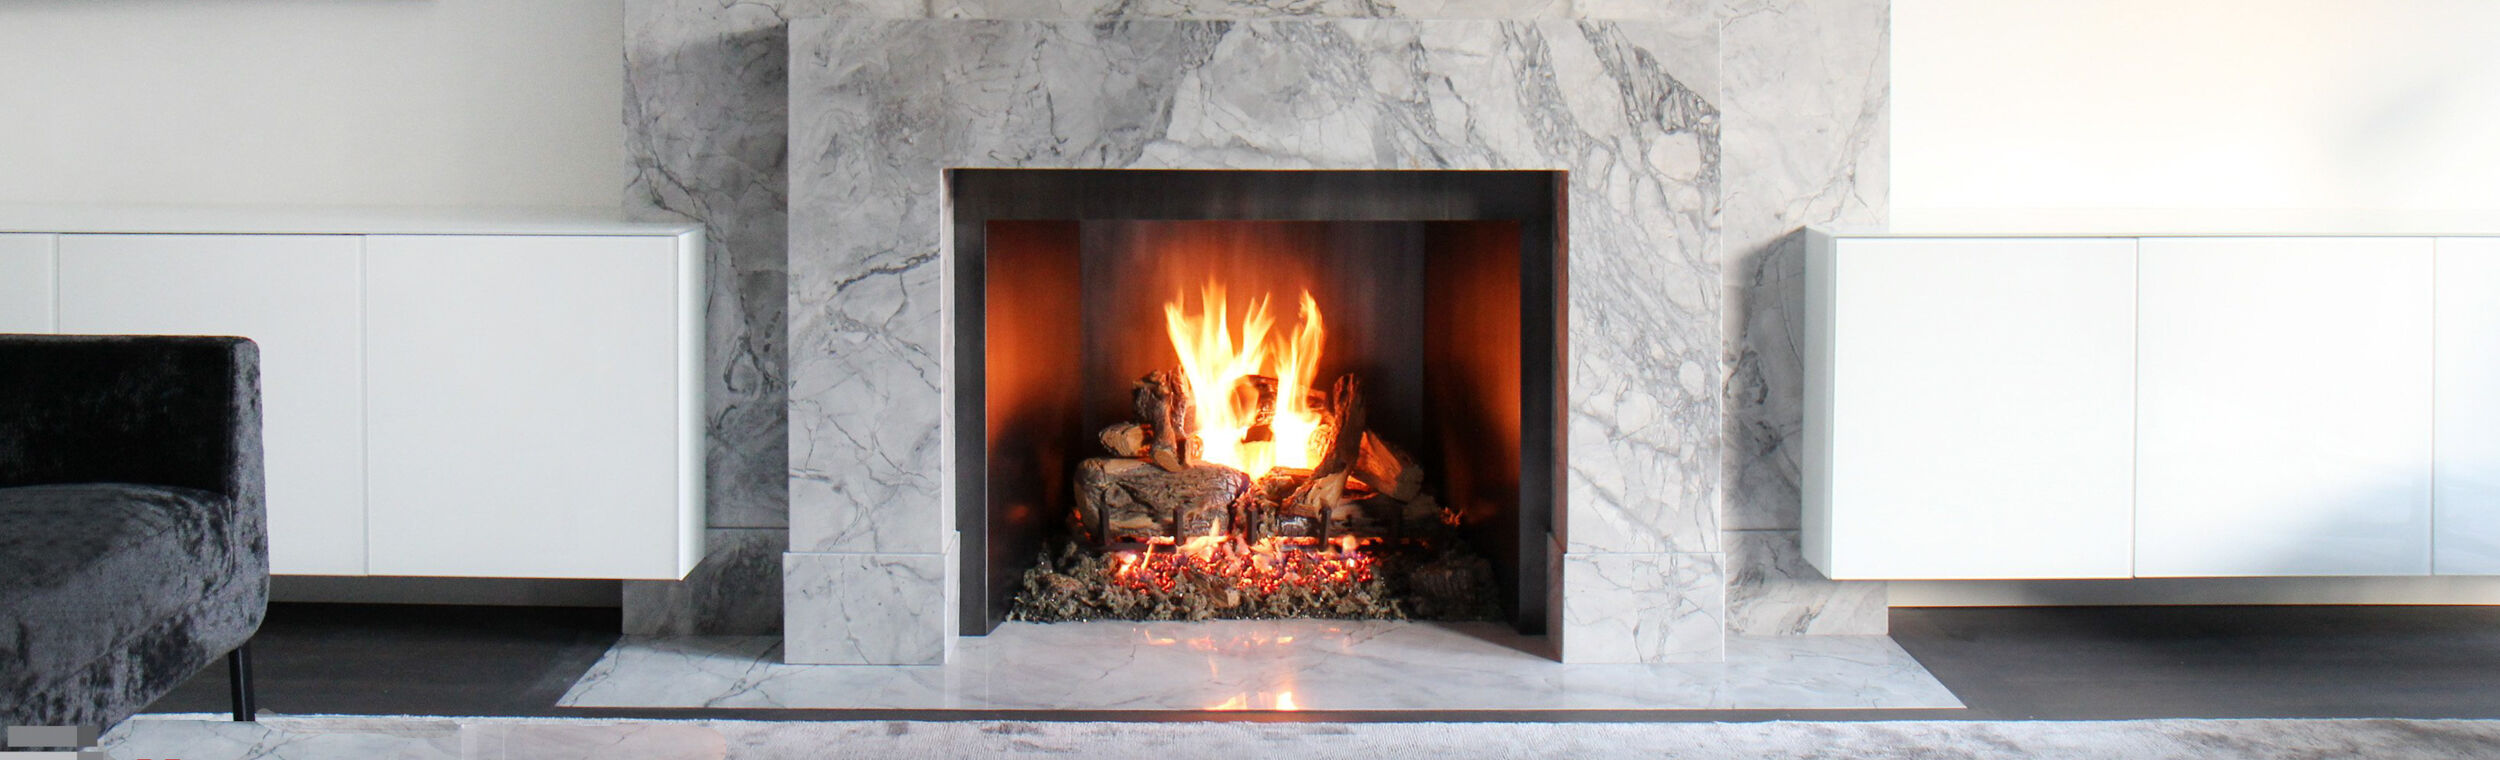 Wood Burning Fireplace To Gas, How Much Does It Cost To Convert A Gas Fireplace Back Wood Burning